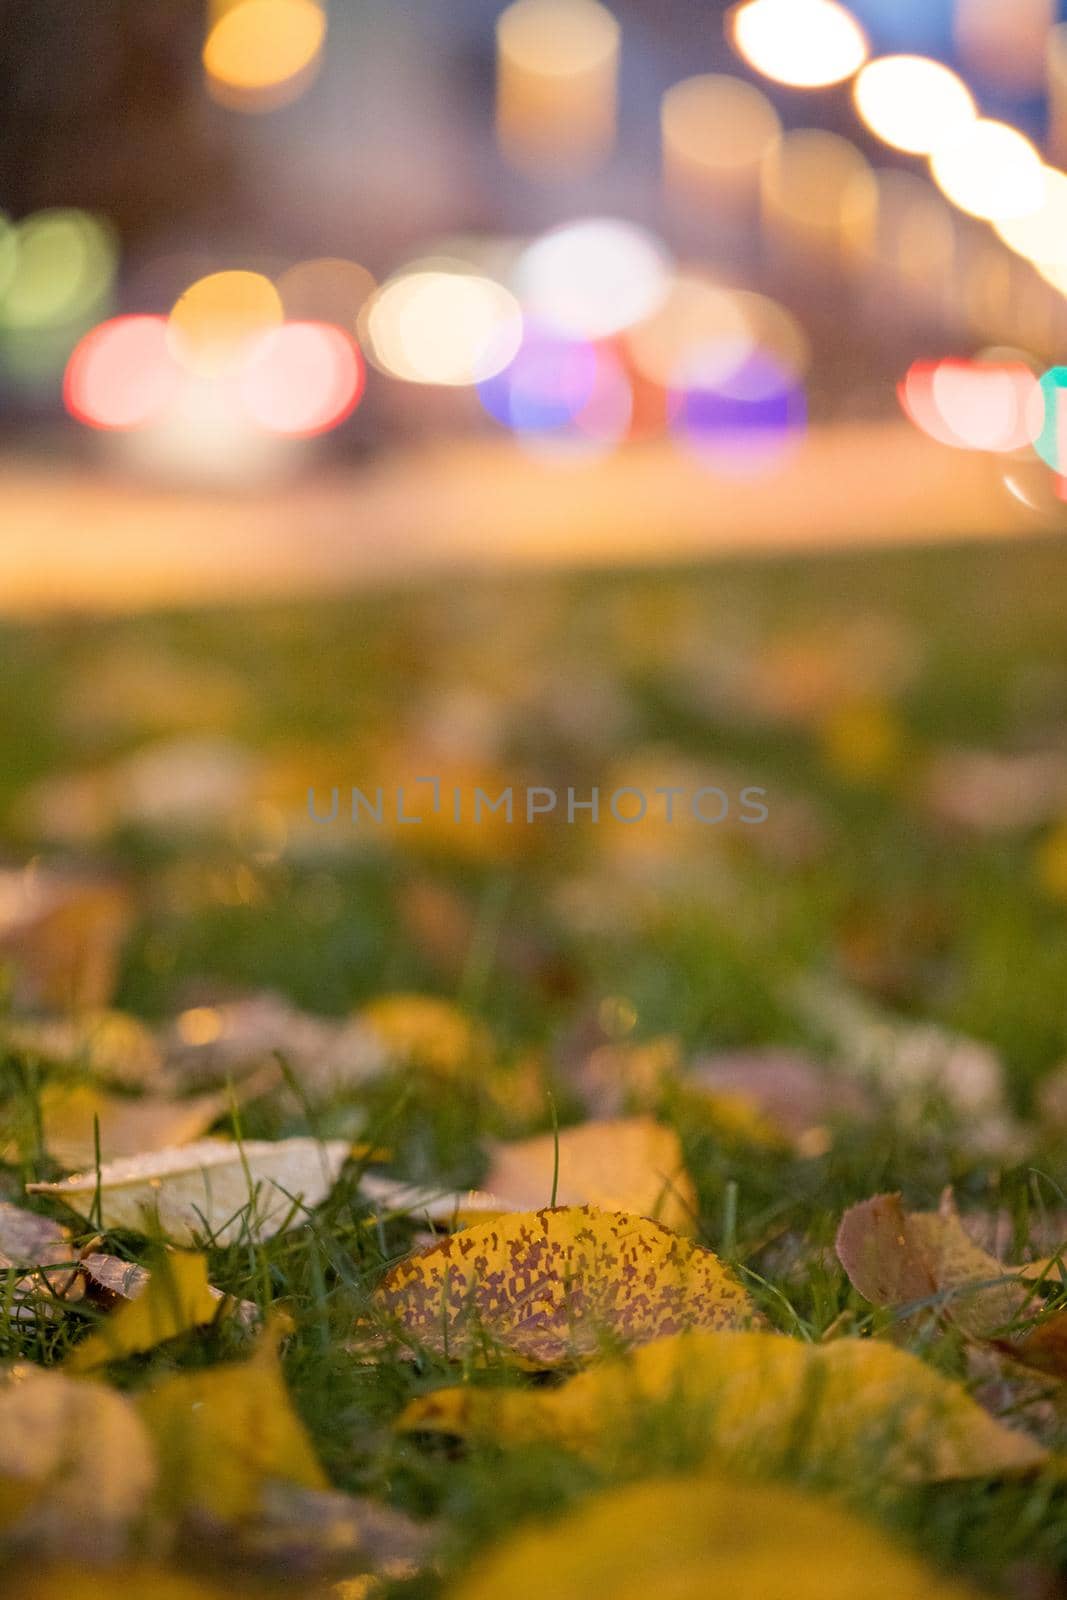 Evening autumn city scenery: Leaf in the foreground, urban city lights in the background